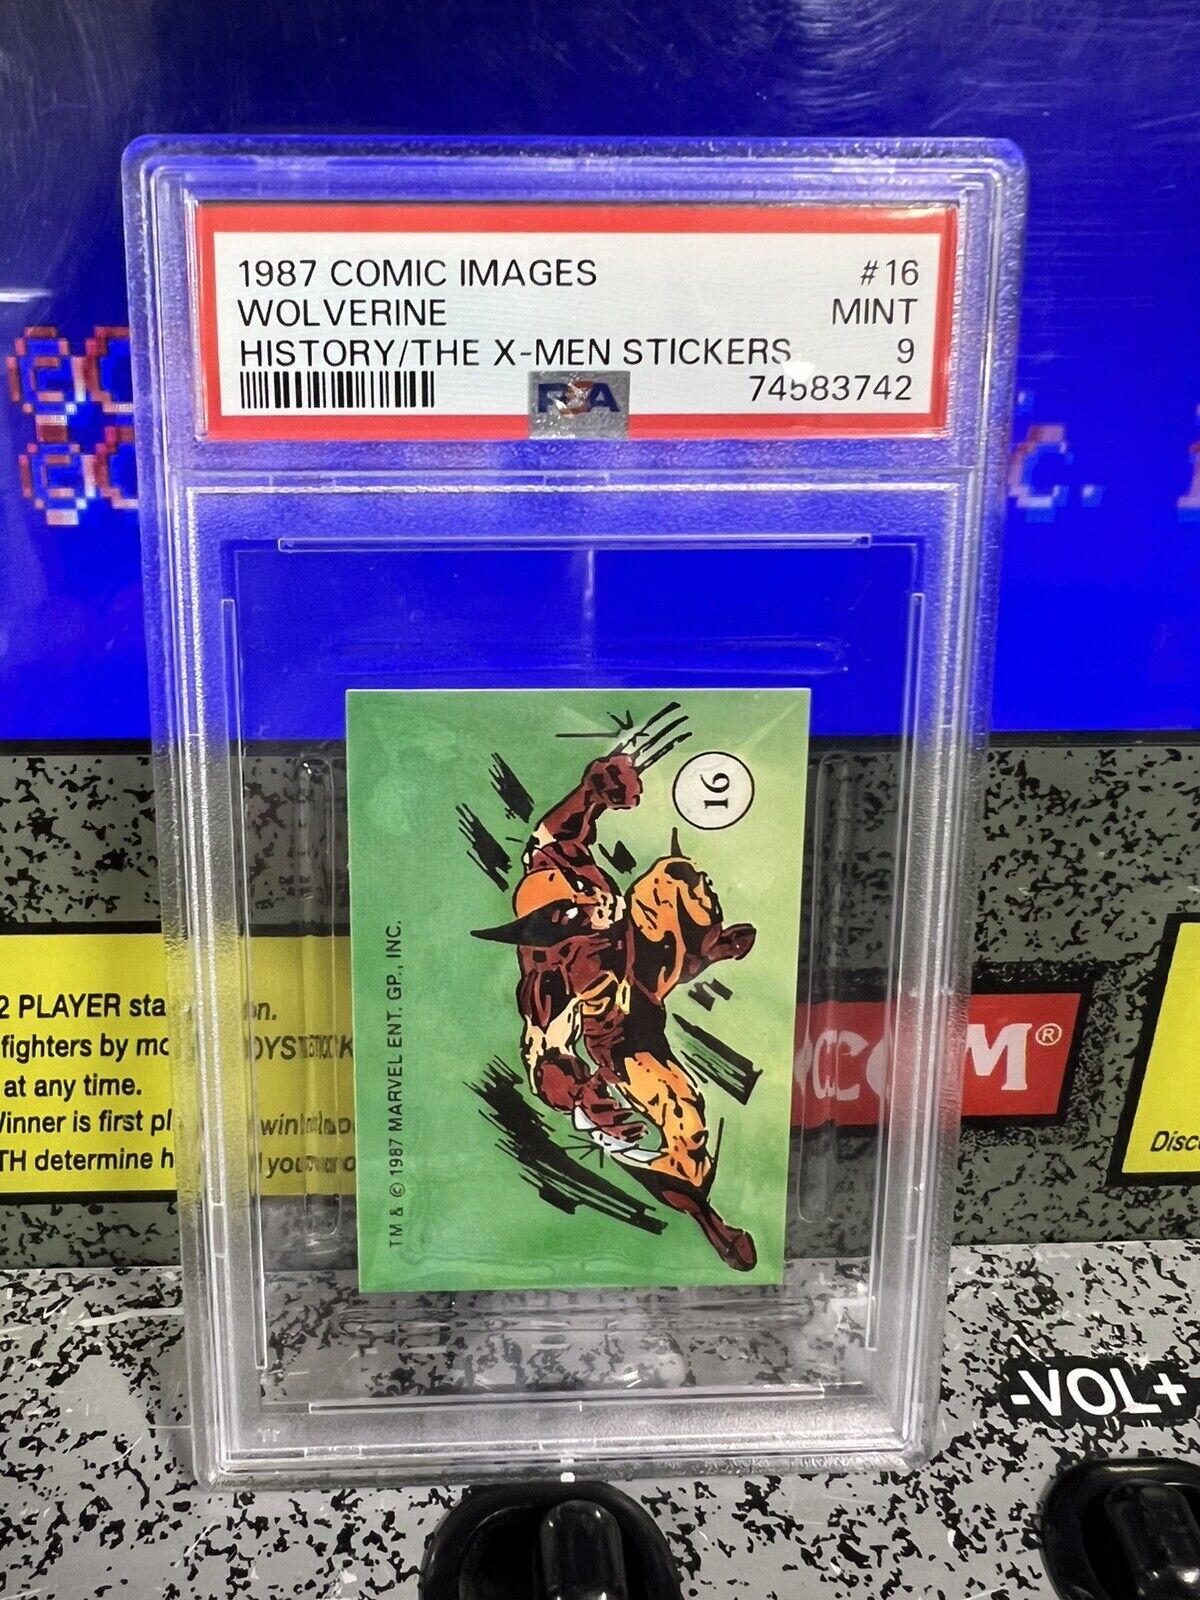 1987 Comic Images Wolverine #16 History/The X-Men Stickers Graded PSA 9 MINT